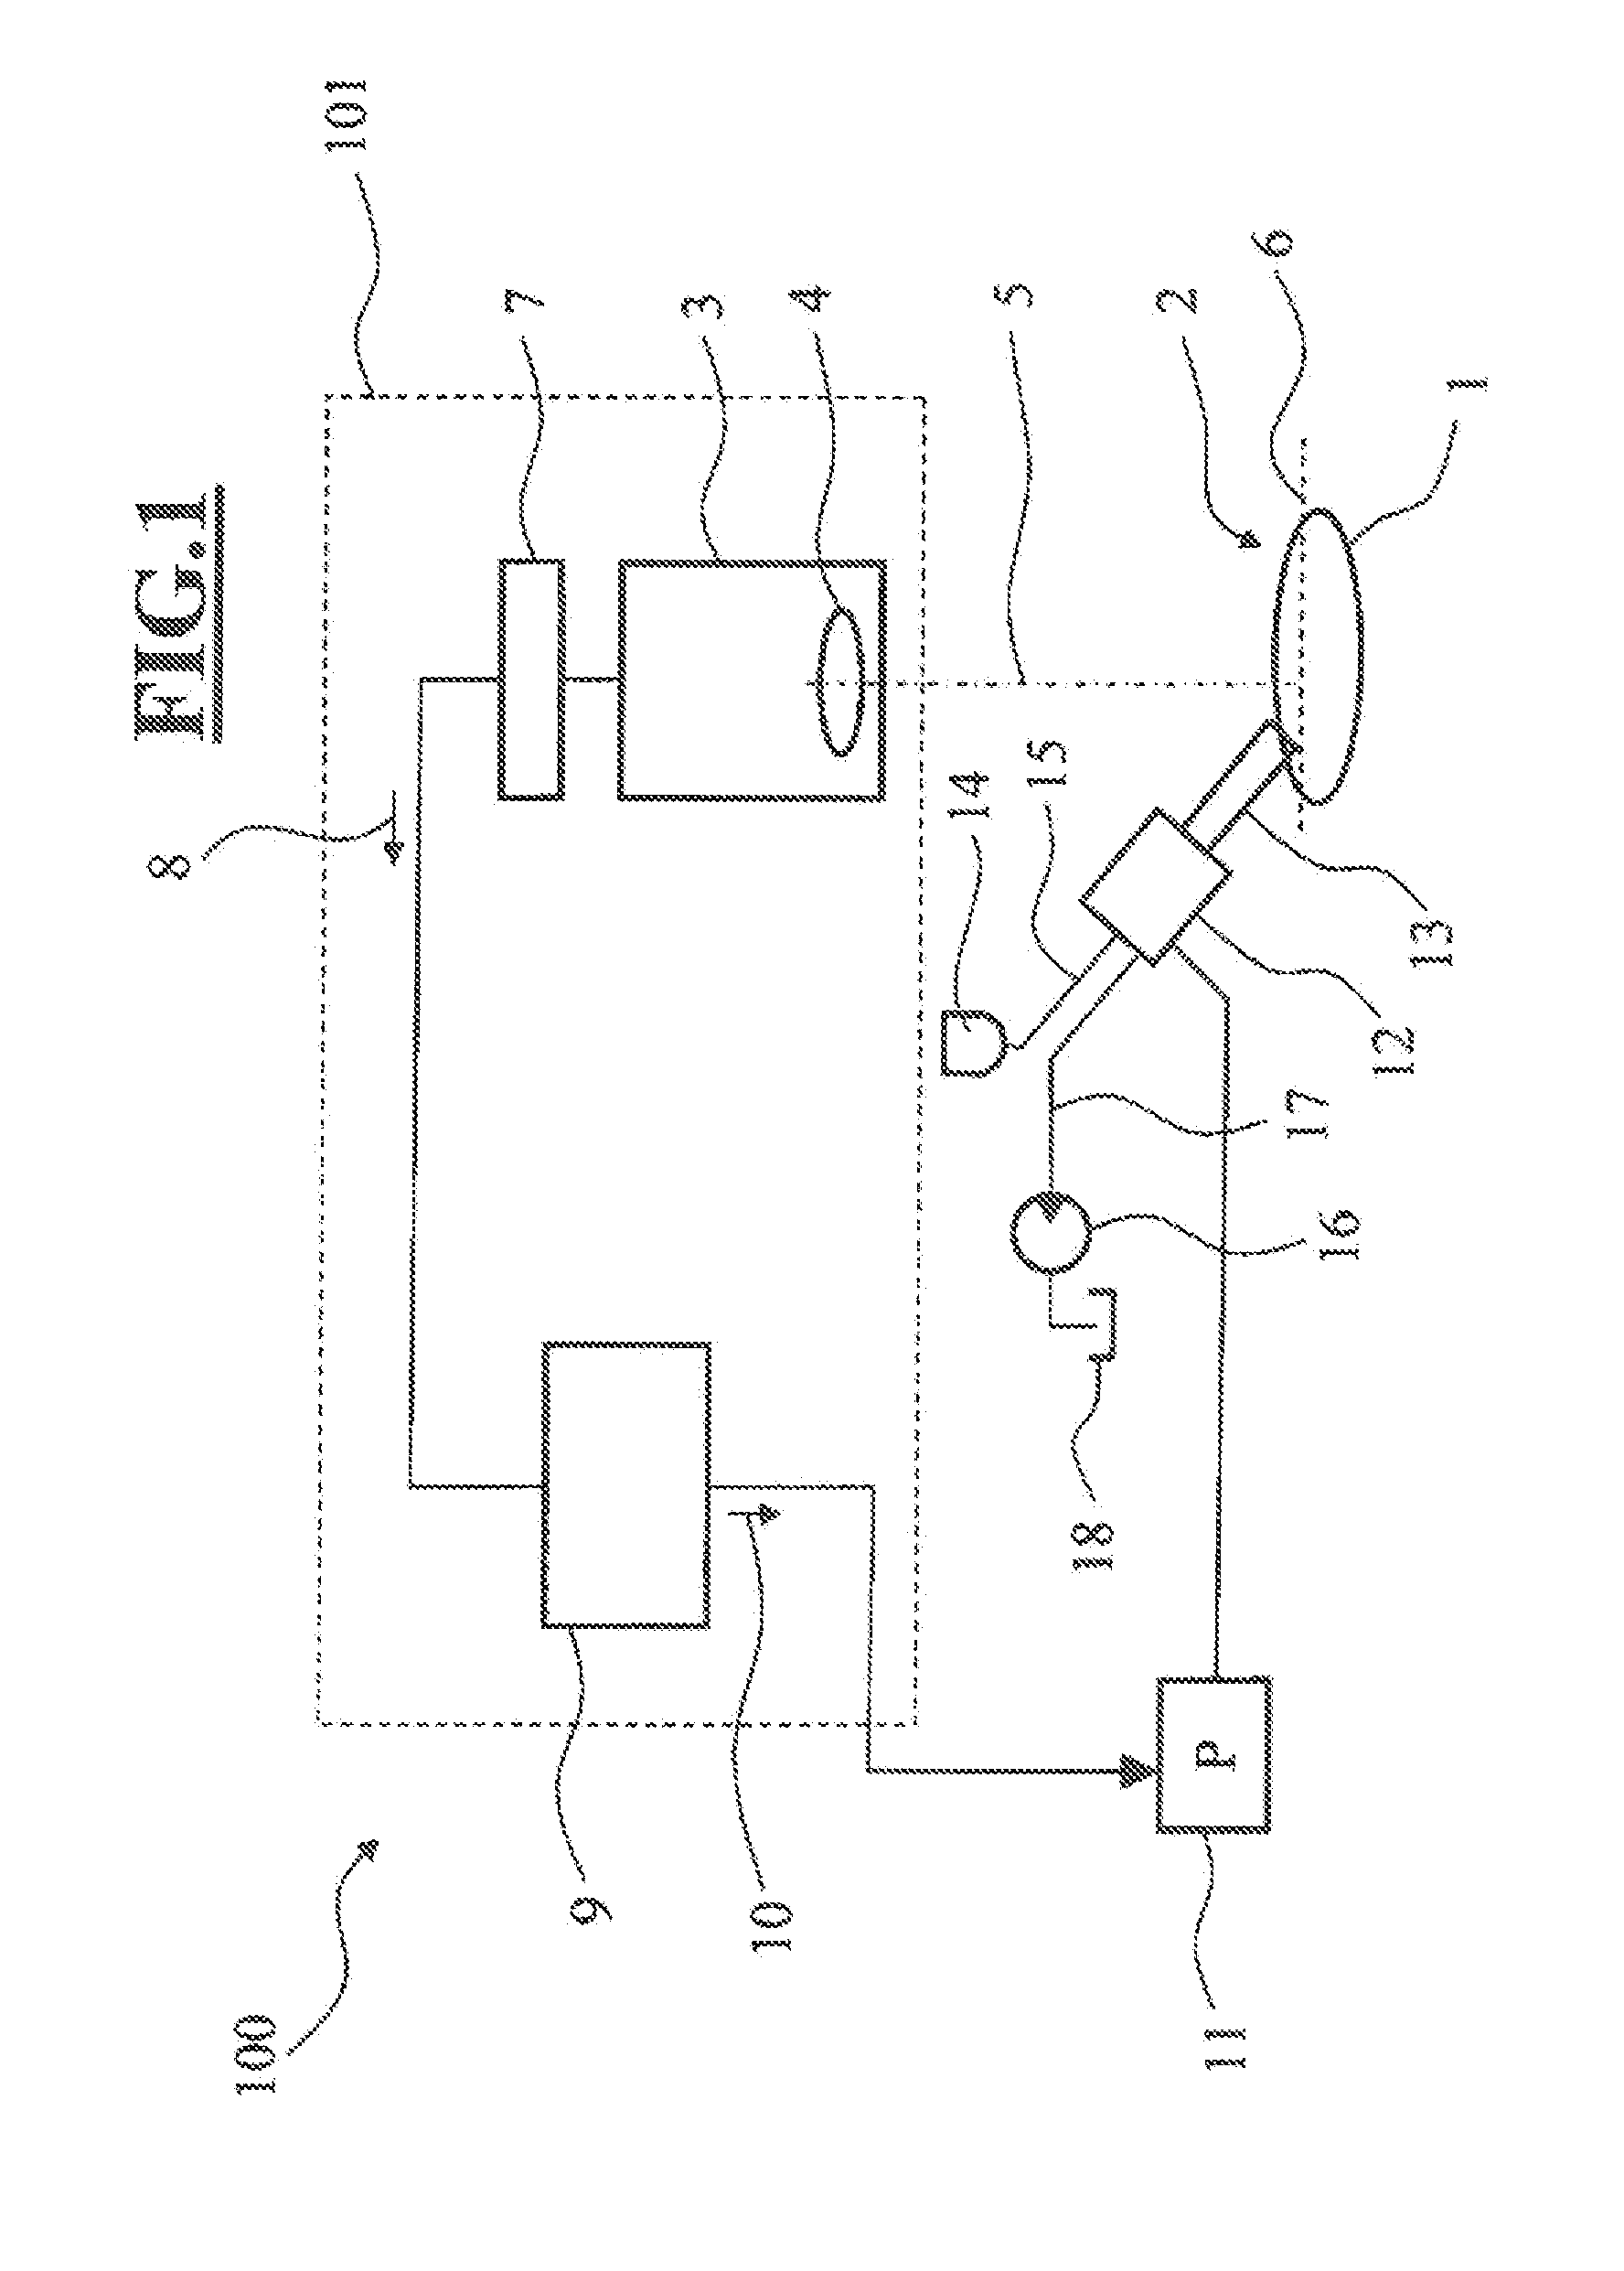 Ophthalmic surgical system and control arrangement therefor